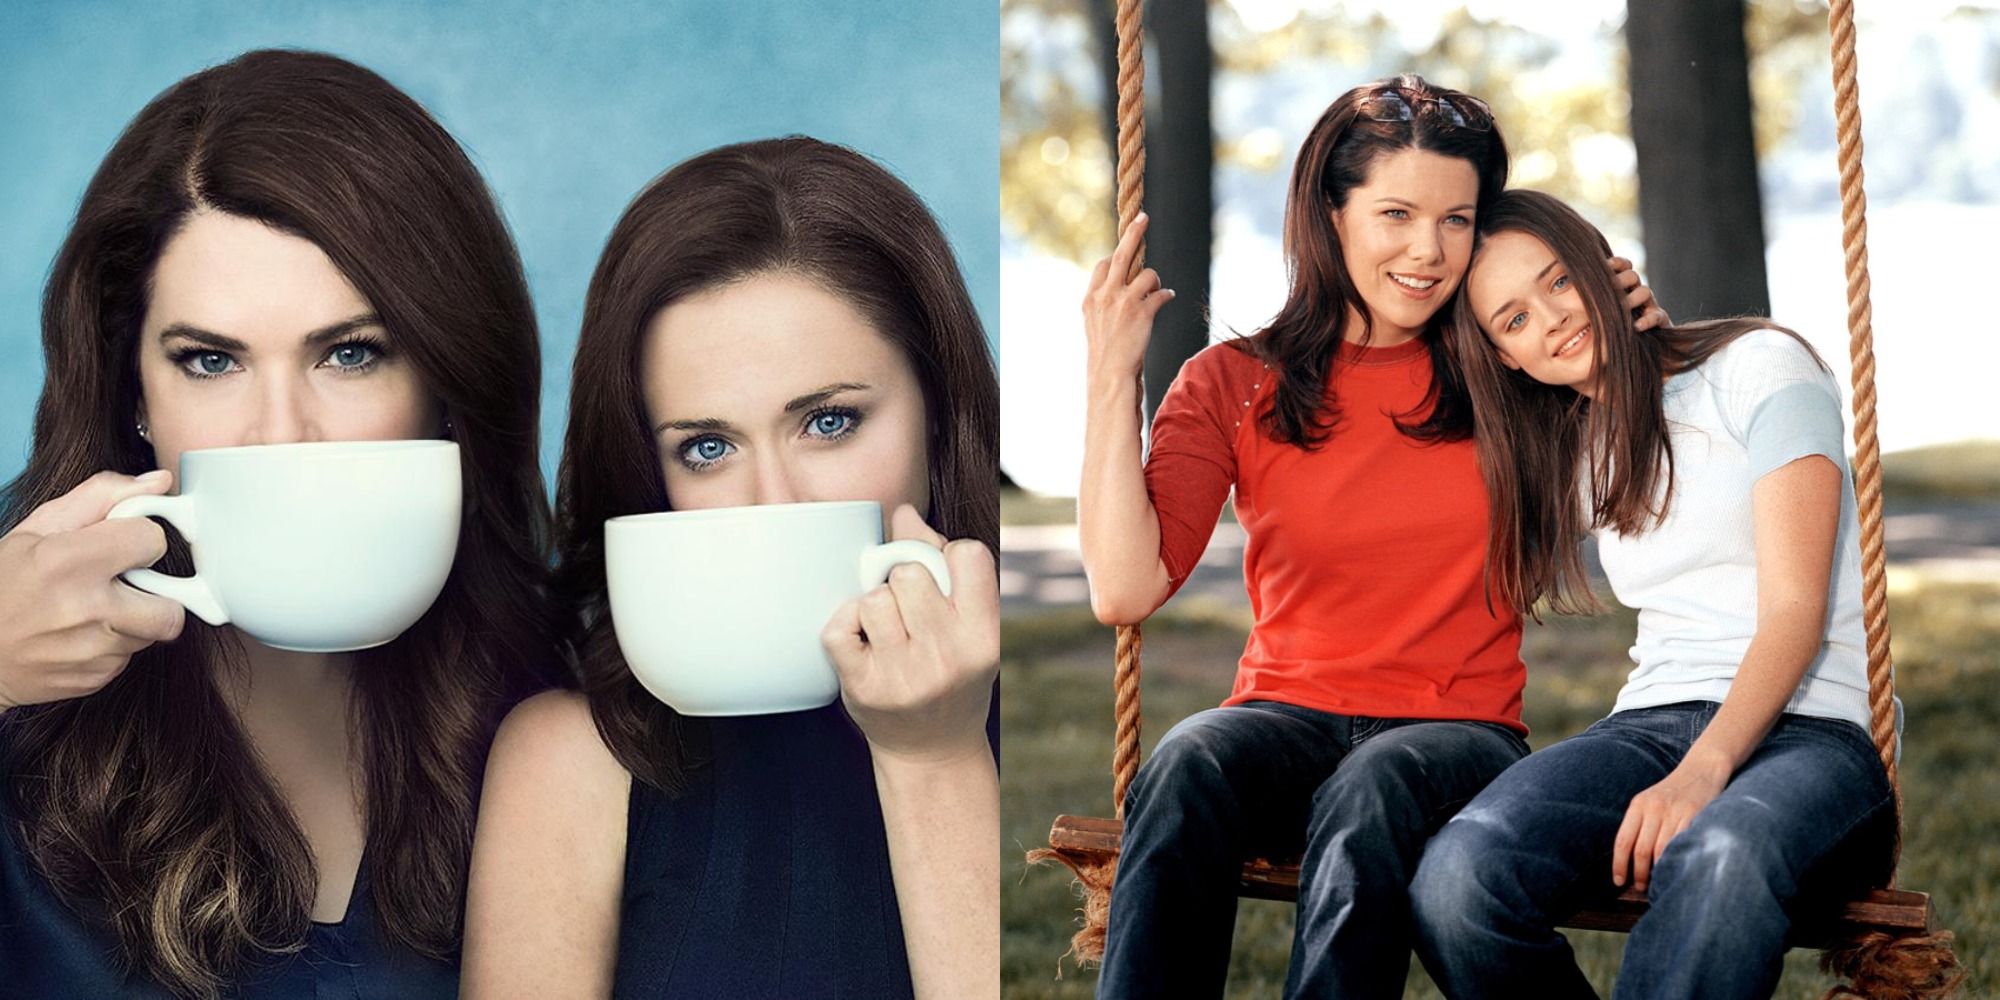 10 Things About Gilmore Girls That Have Aged Surprisingly Well